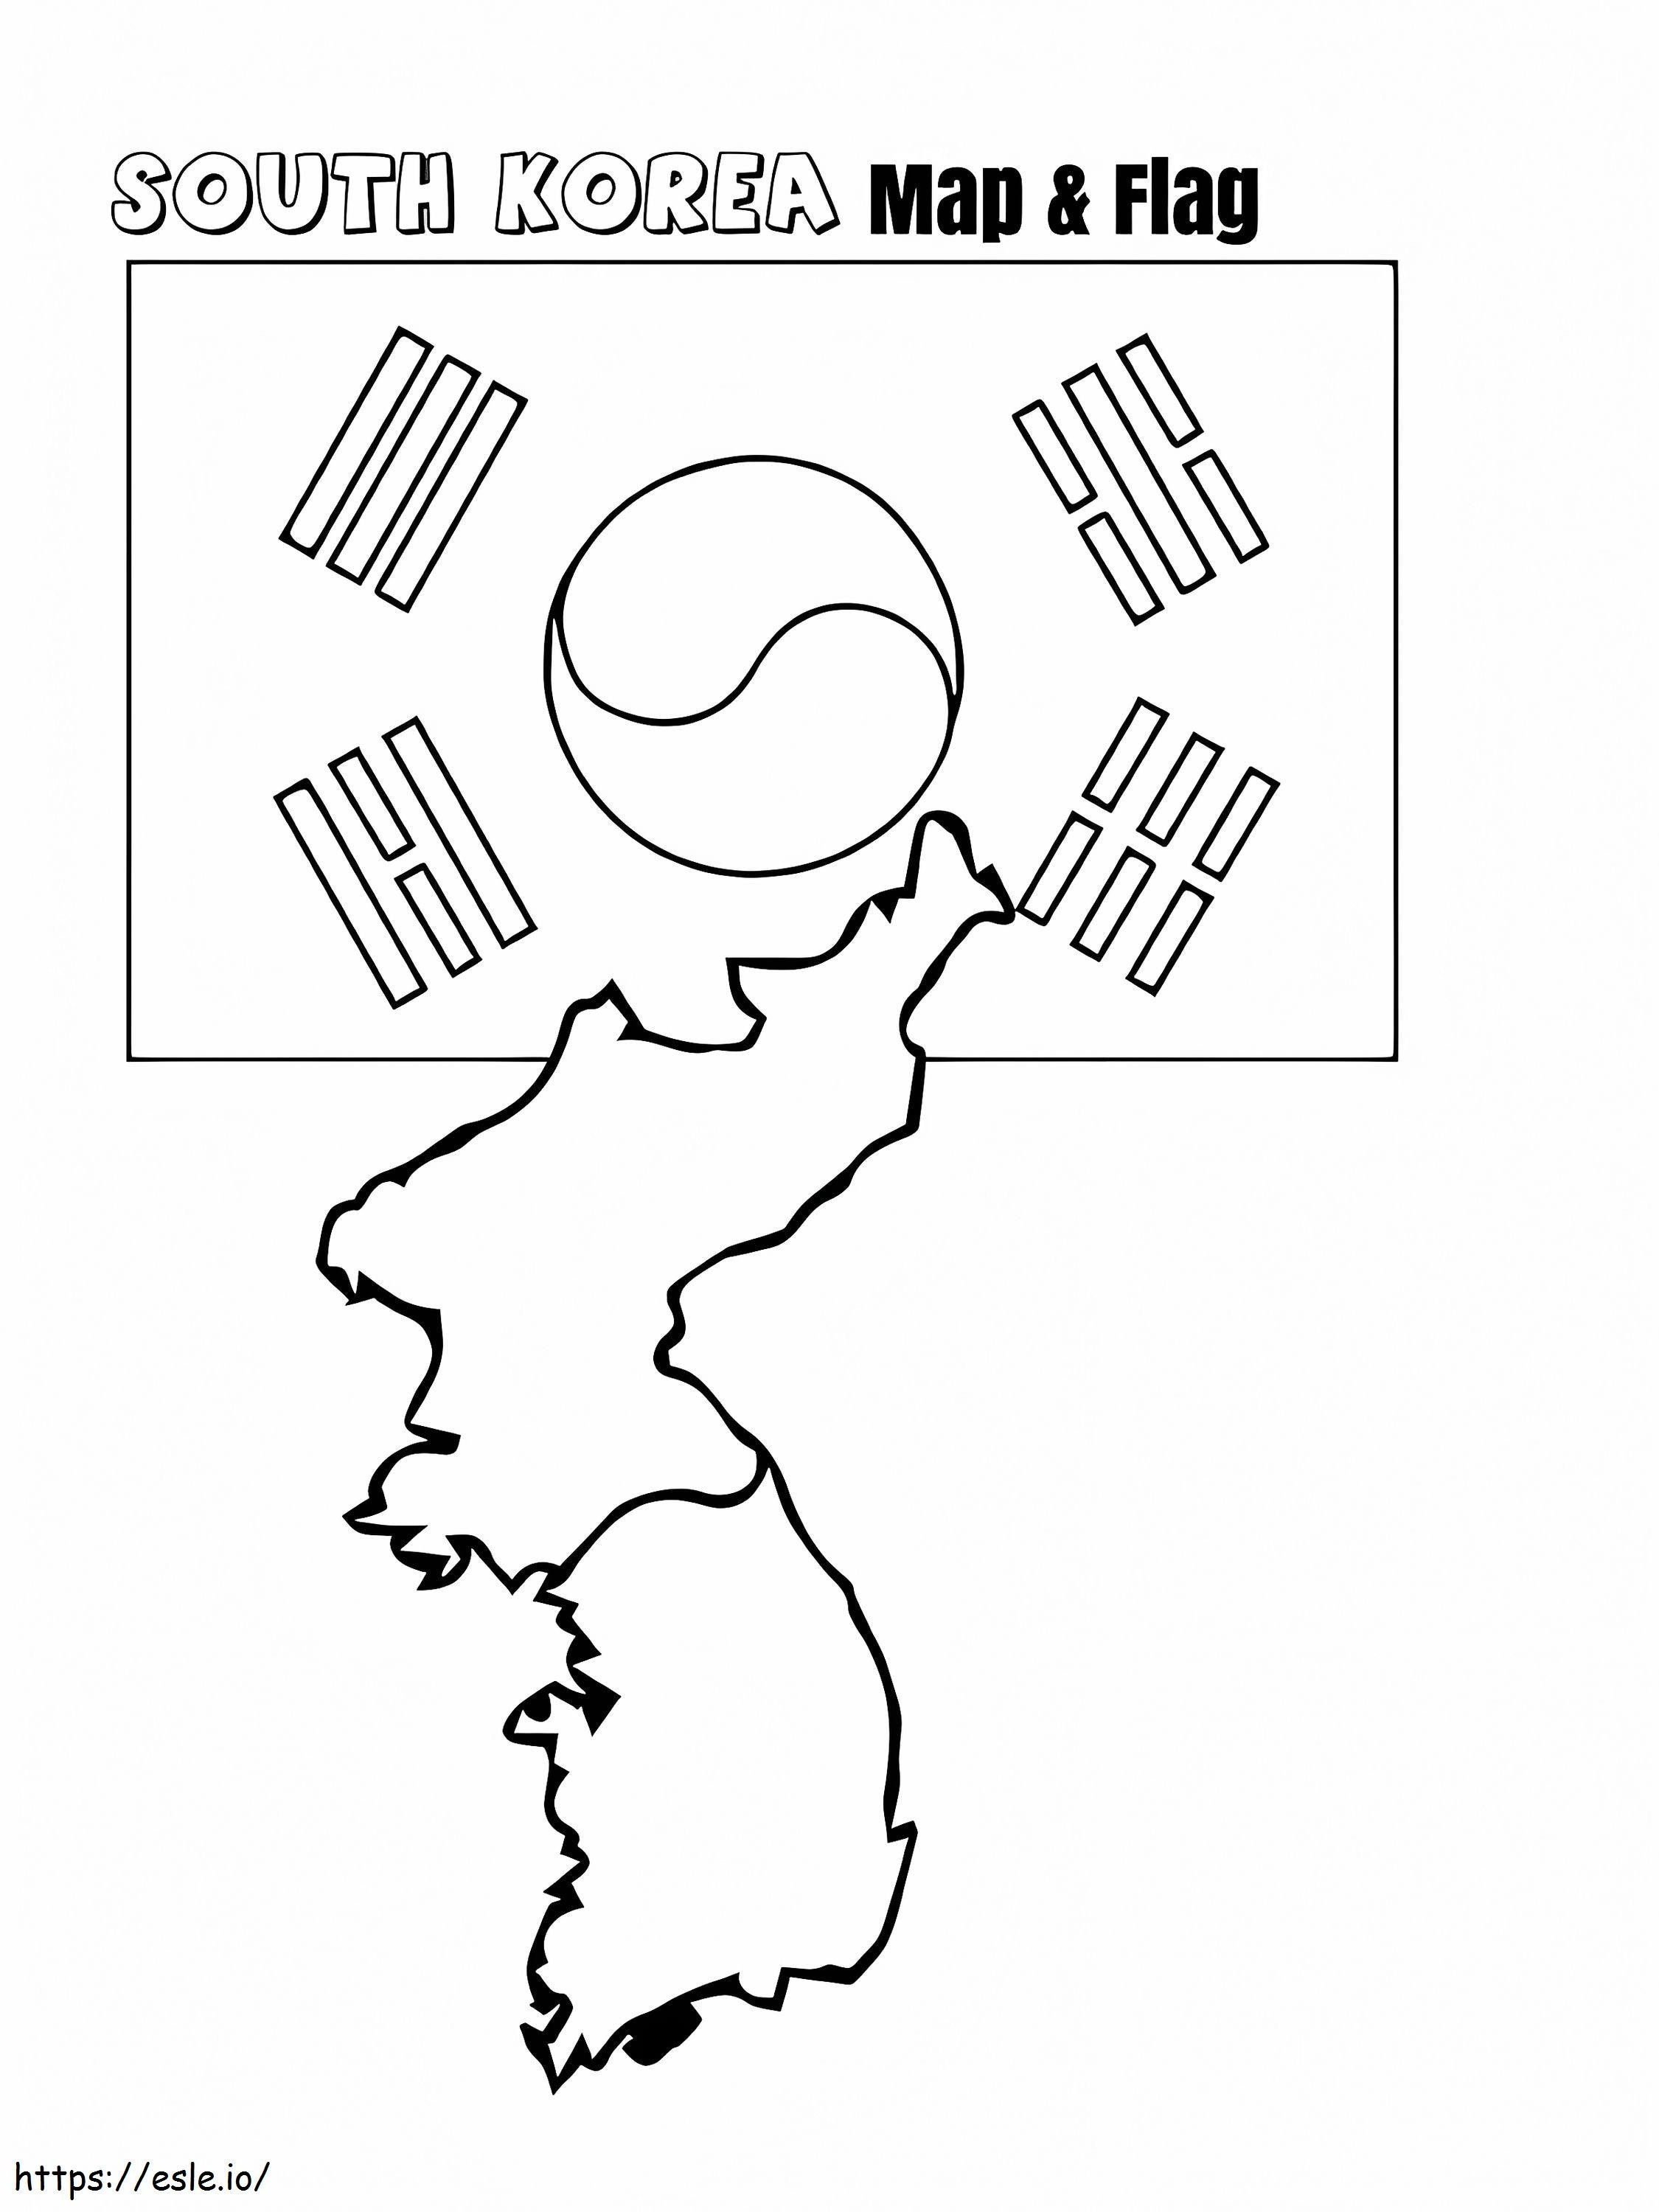 South Korea Map And Flag coloring page